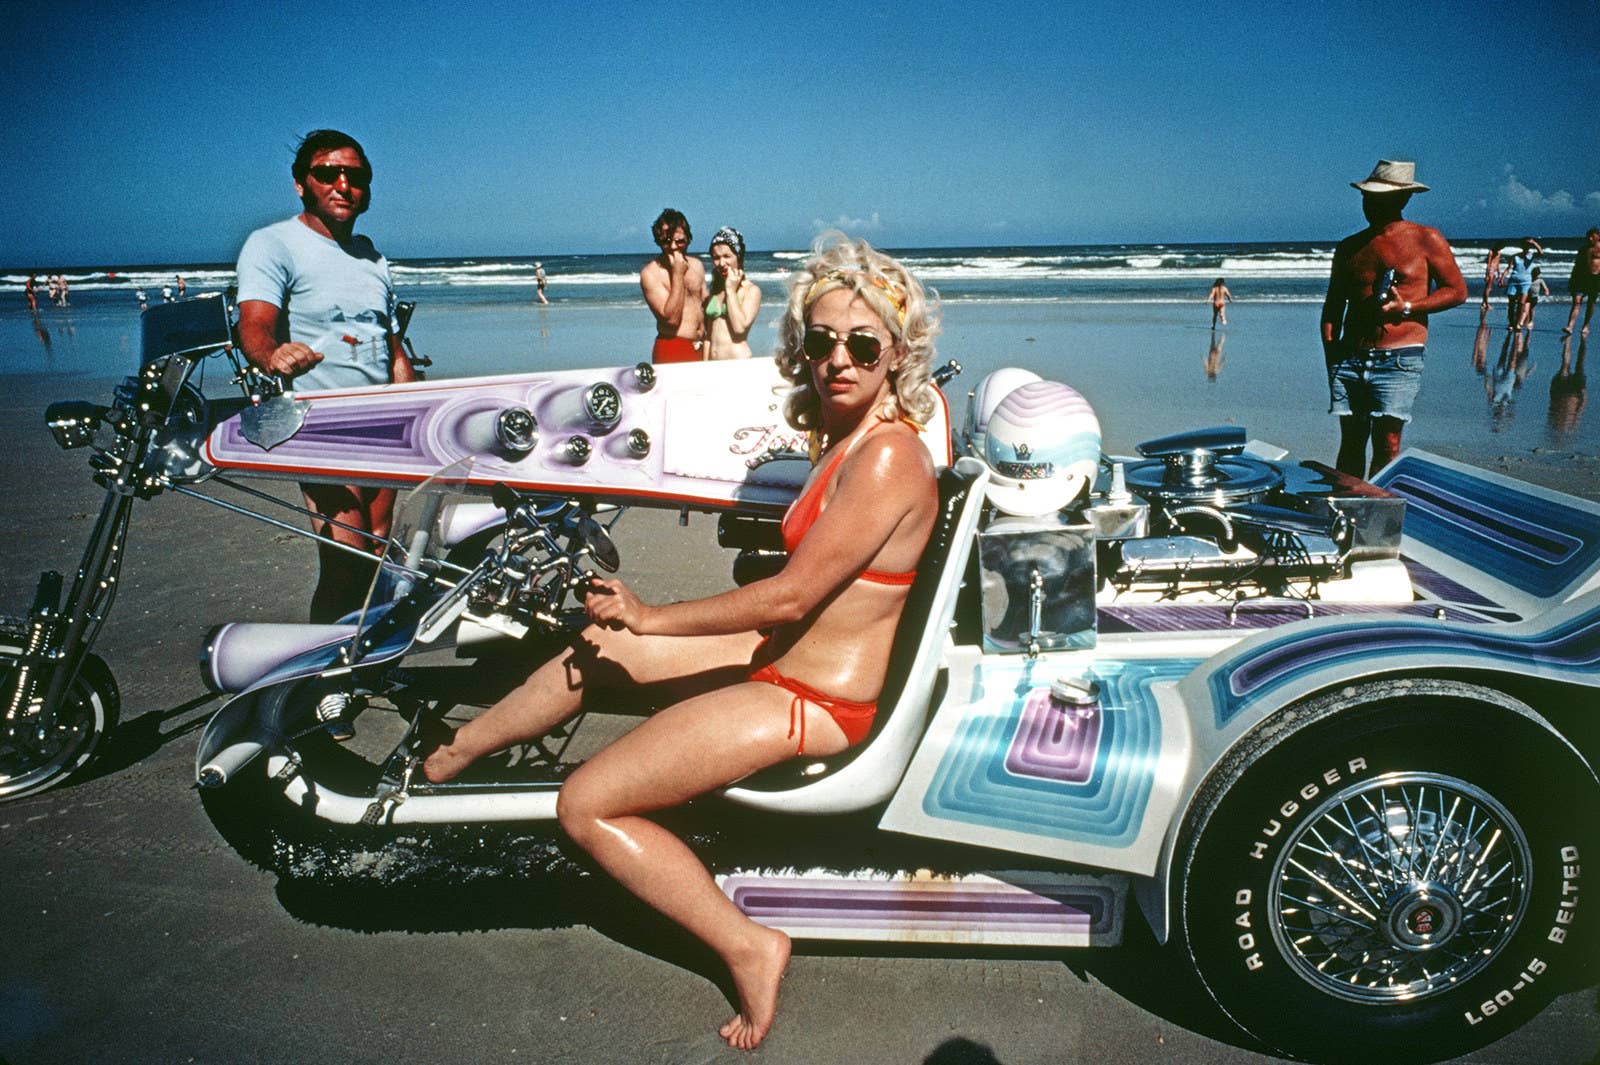 Nudist Nudism Life Girls - 25 Pictures That Show Just How Far Out Beach Life Was In '70s